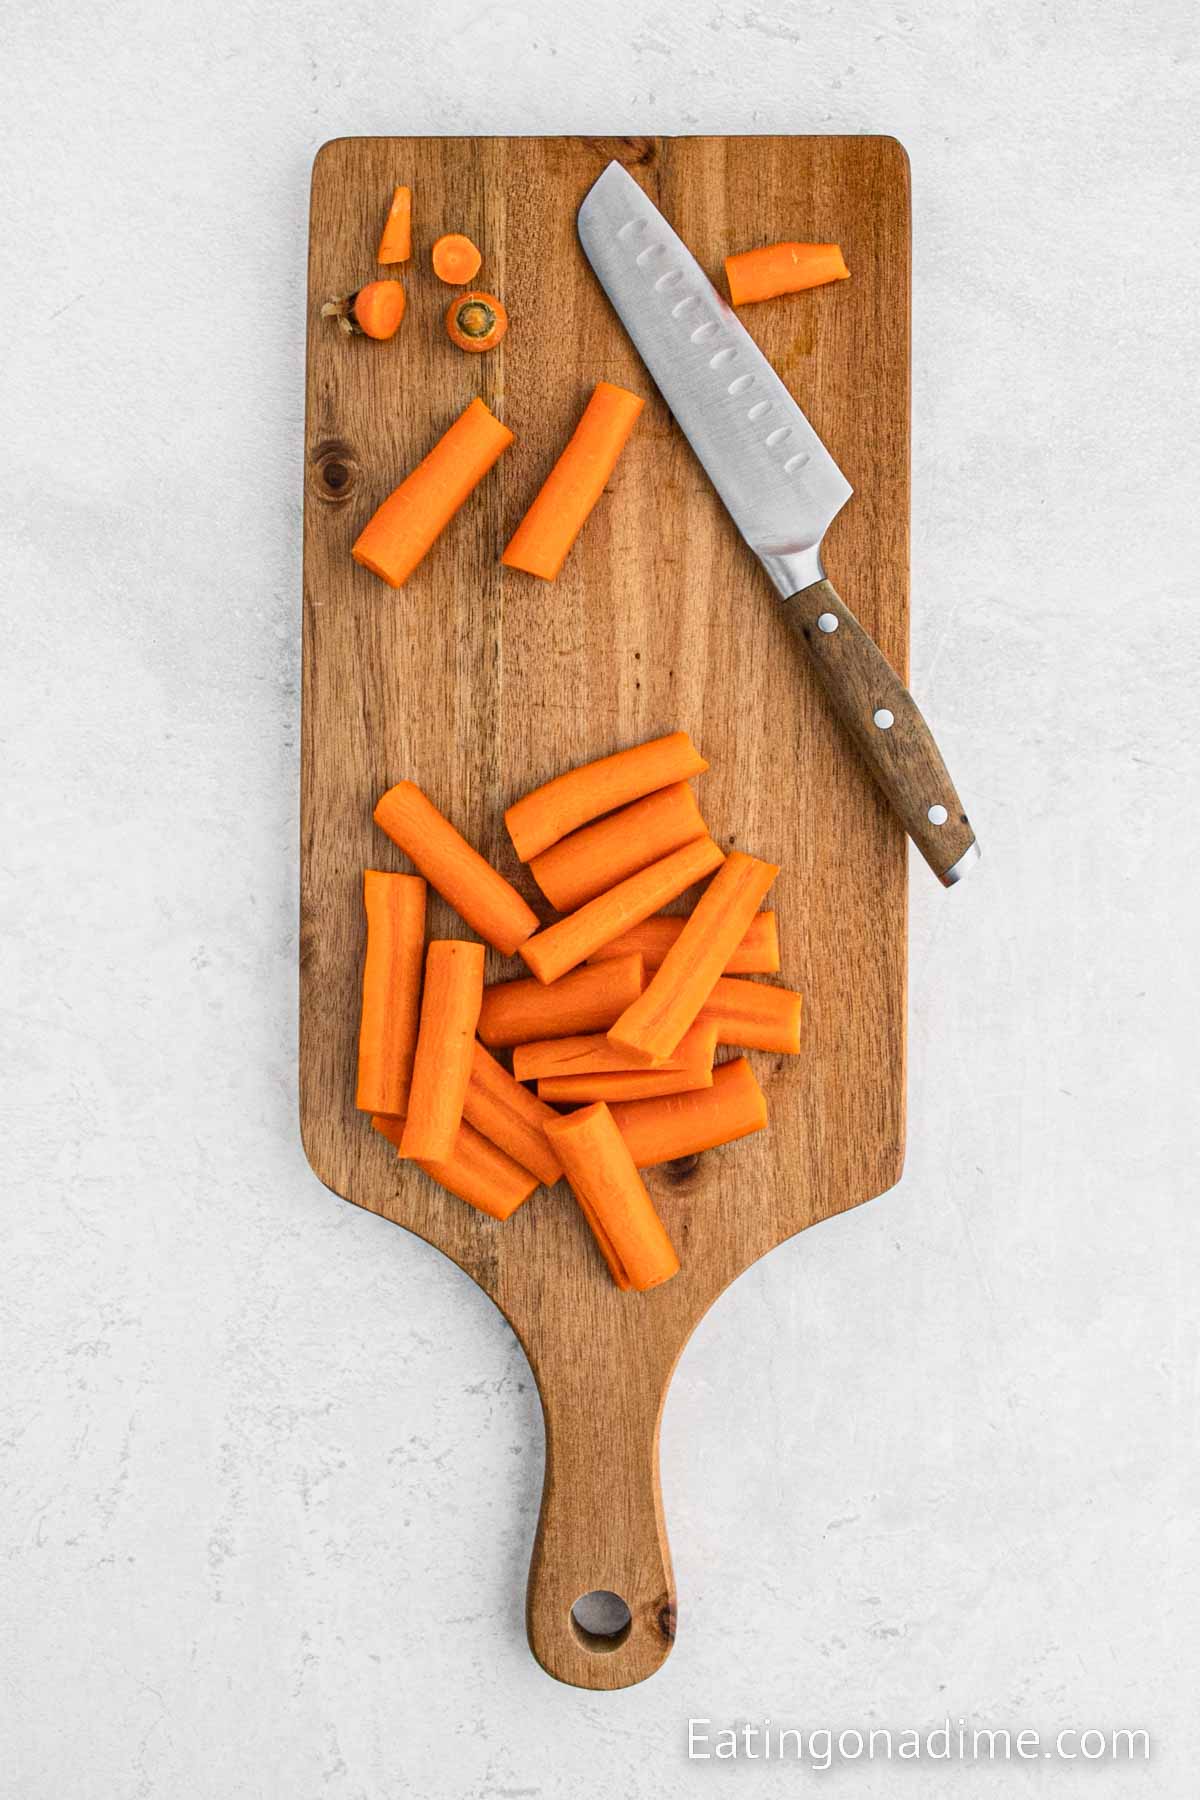 Cut the carrots on the cutting board with a knife